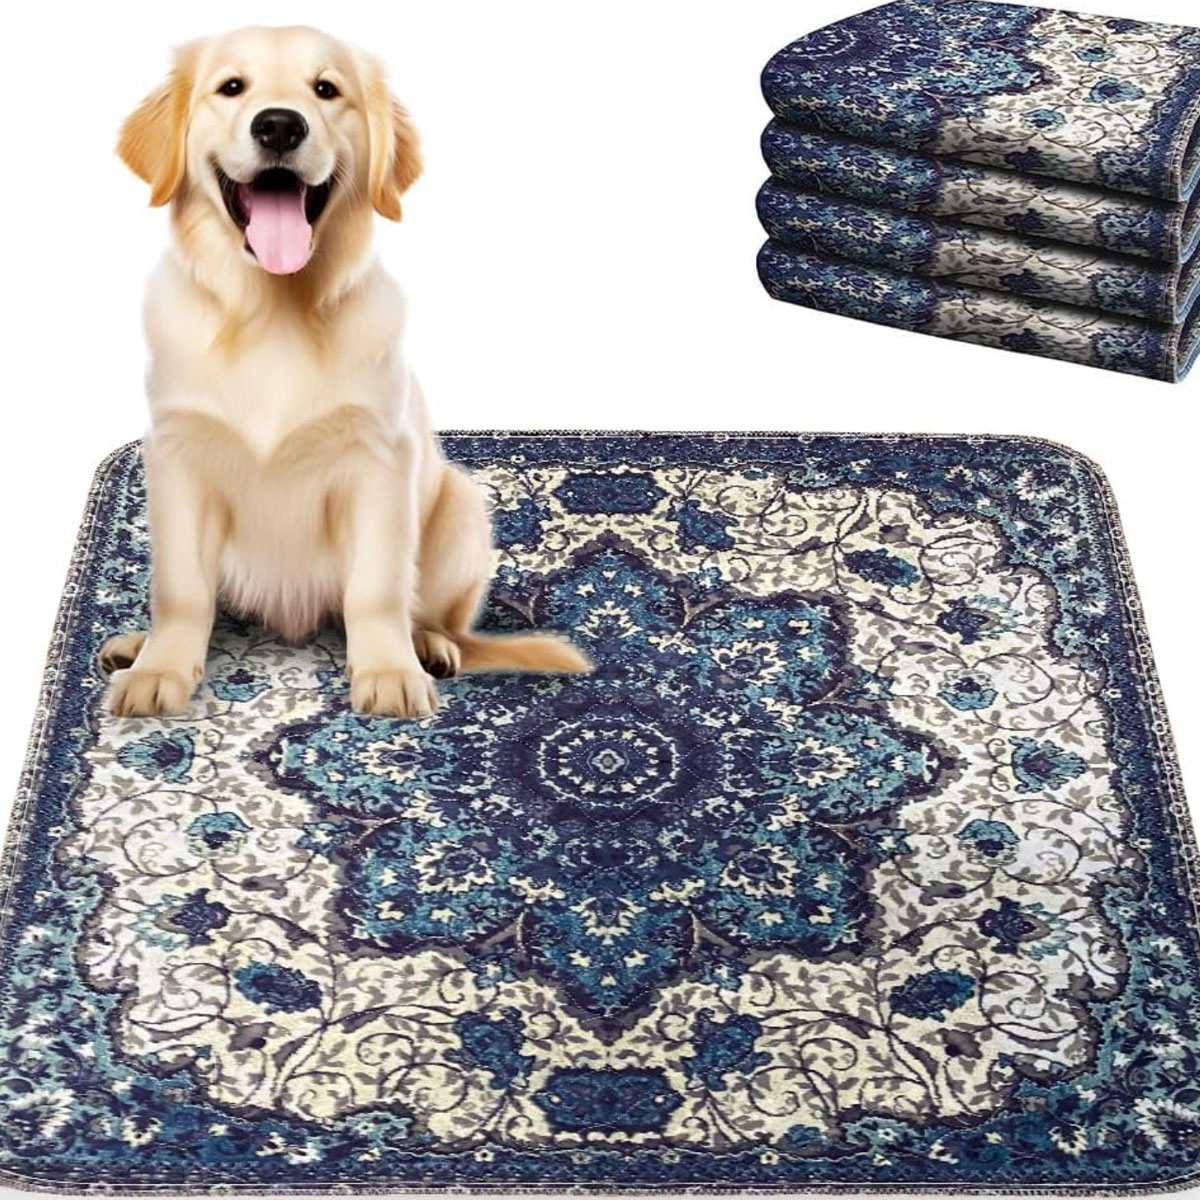 https://akns-images.eonline.com/eol_images/Entire_Site/2023626/rs_1200x1200-230726140815-dog-rug1200-.jpg?fit=around%7C1200:1200&output-quality=90&crop=1200:1200;center,top